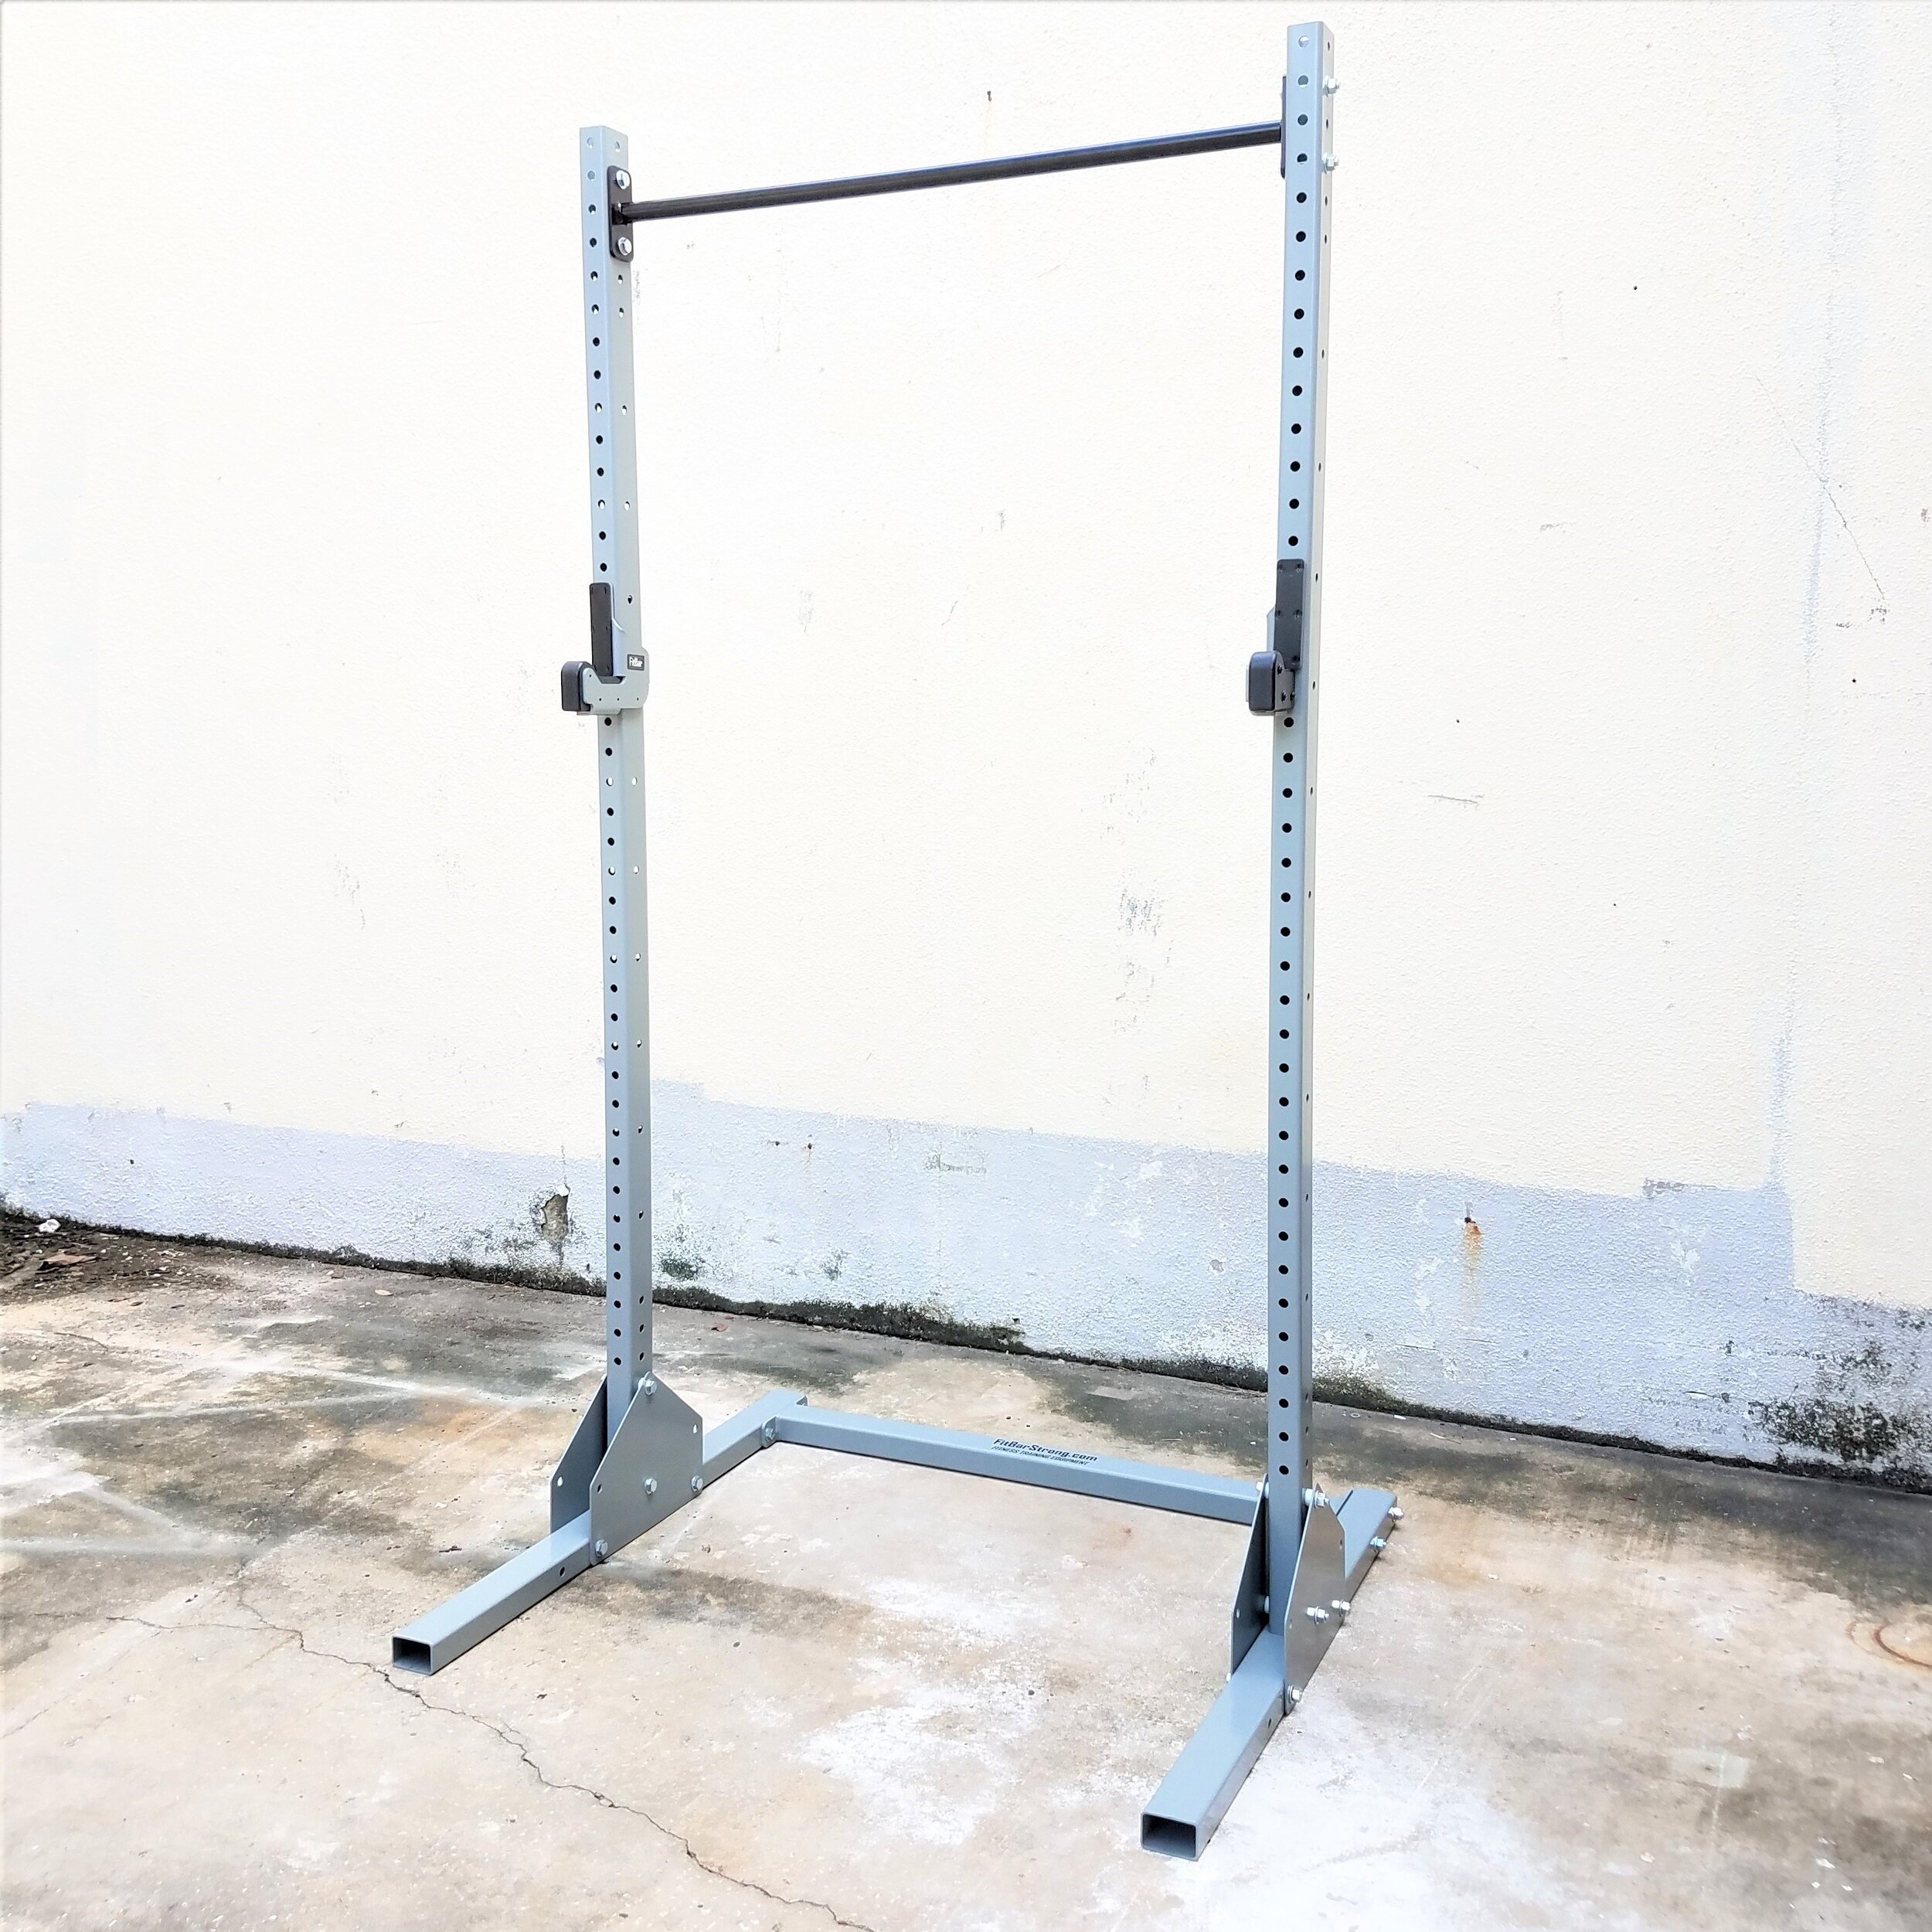 Squat Stand / Pull Up Bar - FitBar Grip, Obstacle, Strength Equipment